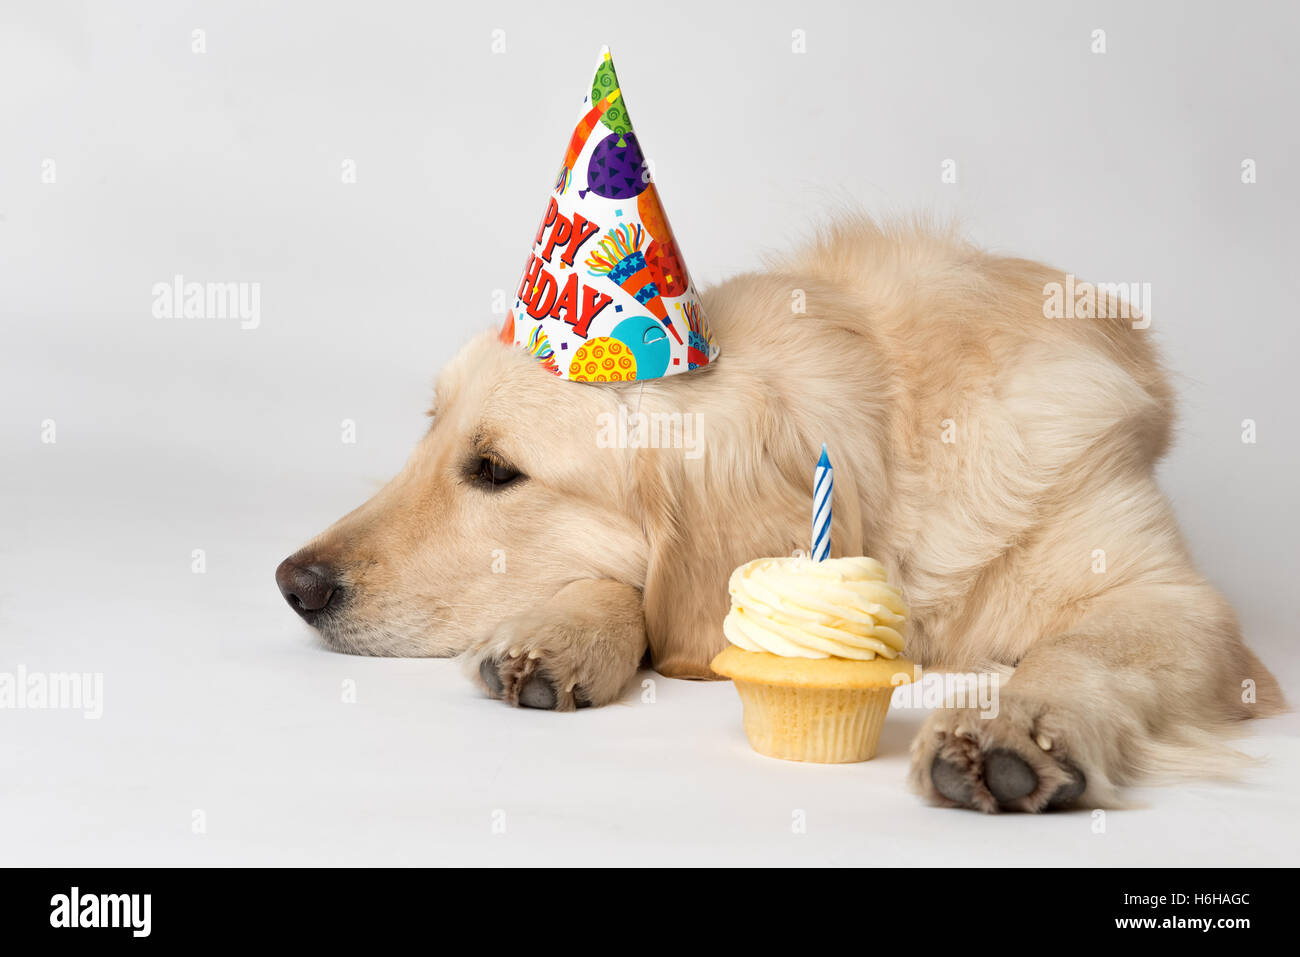 Birthday dog with party hat and cupcake seems unimpressed by his party. Shot on white. Dog is English Golden Retriever. Stock Photo